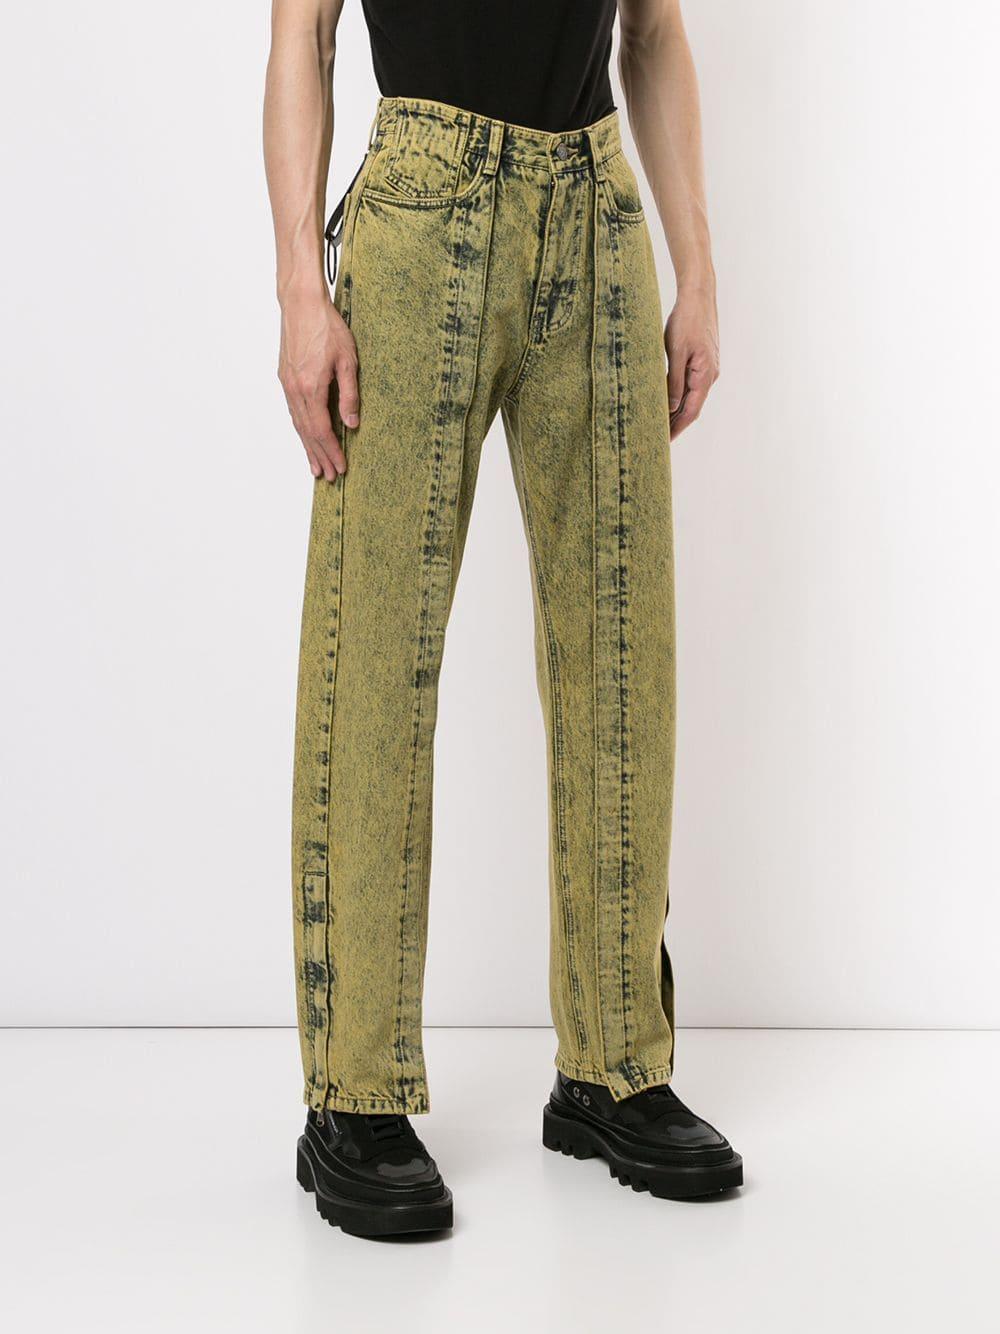 Wooyoungmi Denim Faded Wash Jeans in Yellow for Men - Lyst